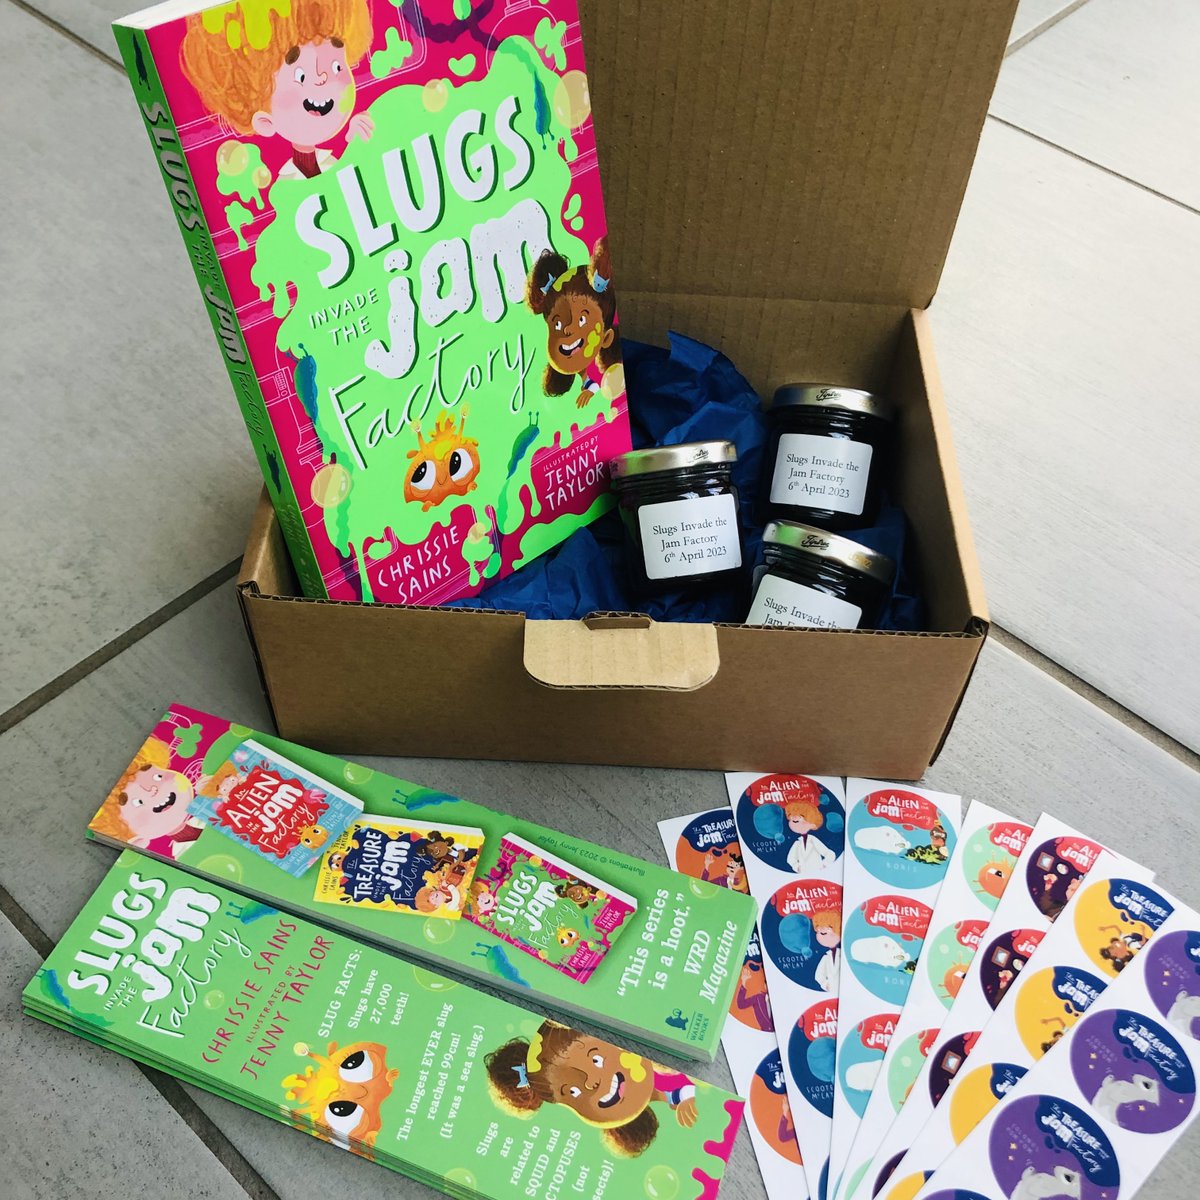 ⚡️SCHOOL BOOK GIVEAWAY!⚡️ 👇I have three class goody boxes to giveaway!👇 Each box contains: 🐌1 x signed copy of 'Slugs Invade the Jam Factory' 🐌35 x bookmarks 🐌35 x stickers 🐌3 x mini jars of jam Like, Follow and Reteet to win. Random winner selected 01/05. UK Only.